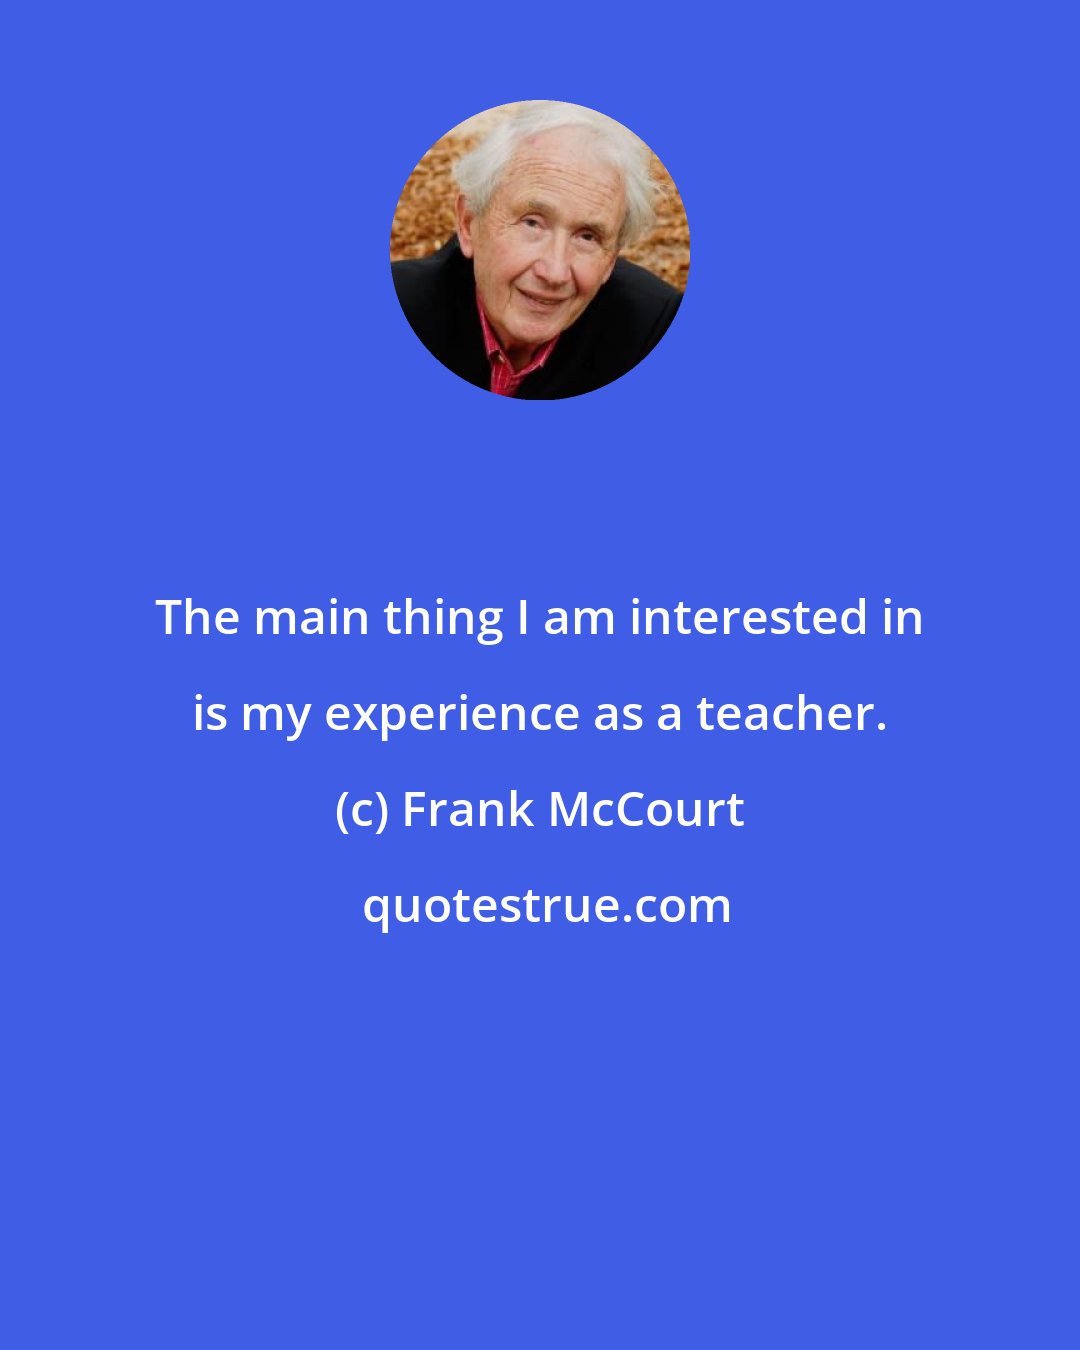 Frank McCourt: The main thing I am interested in is my experience as a teacher.